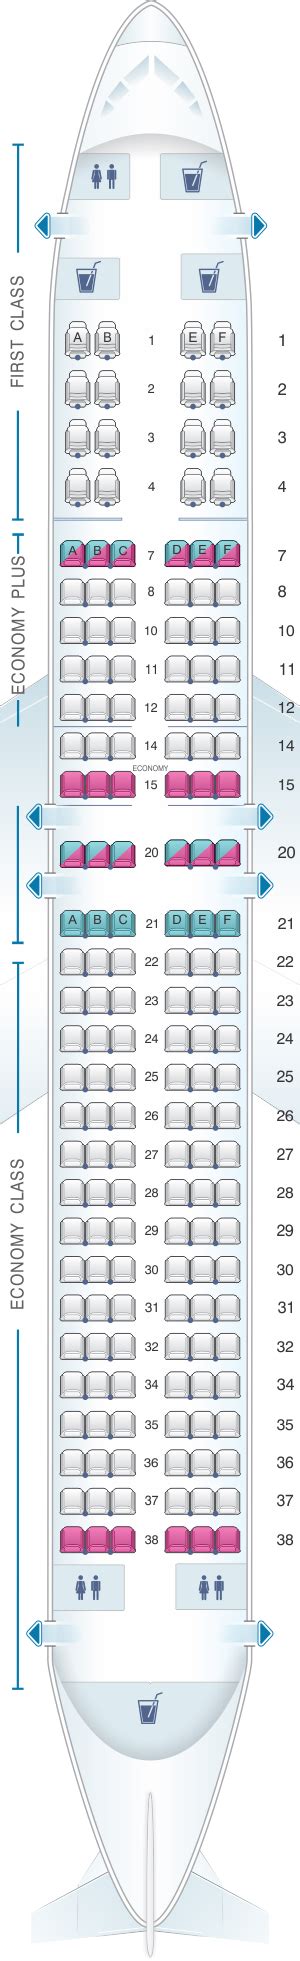 Boeing 737 800 United Airlines Seating Chart Tutor Suhu